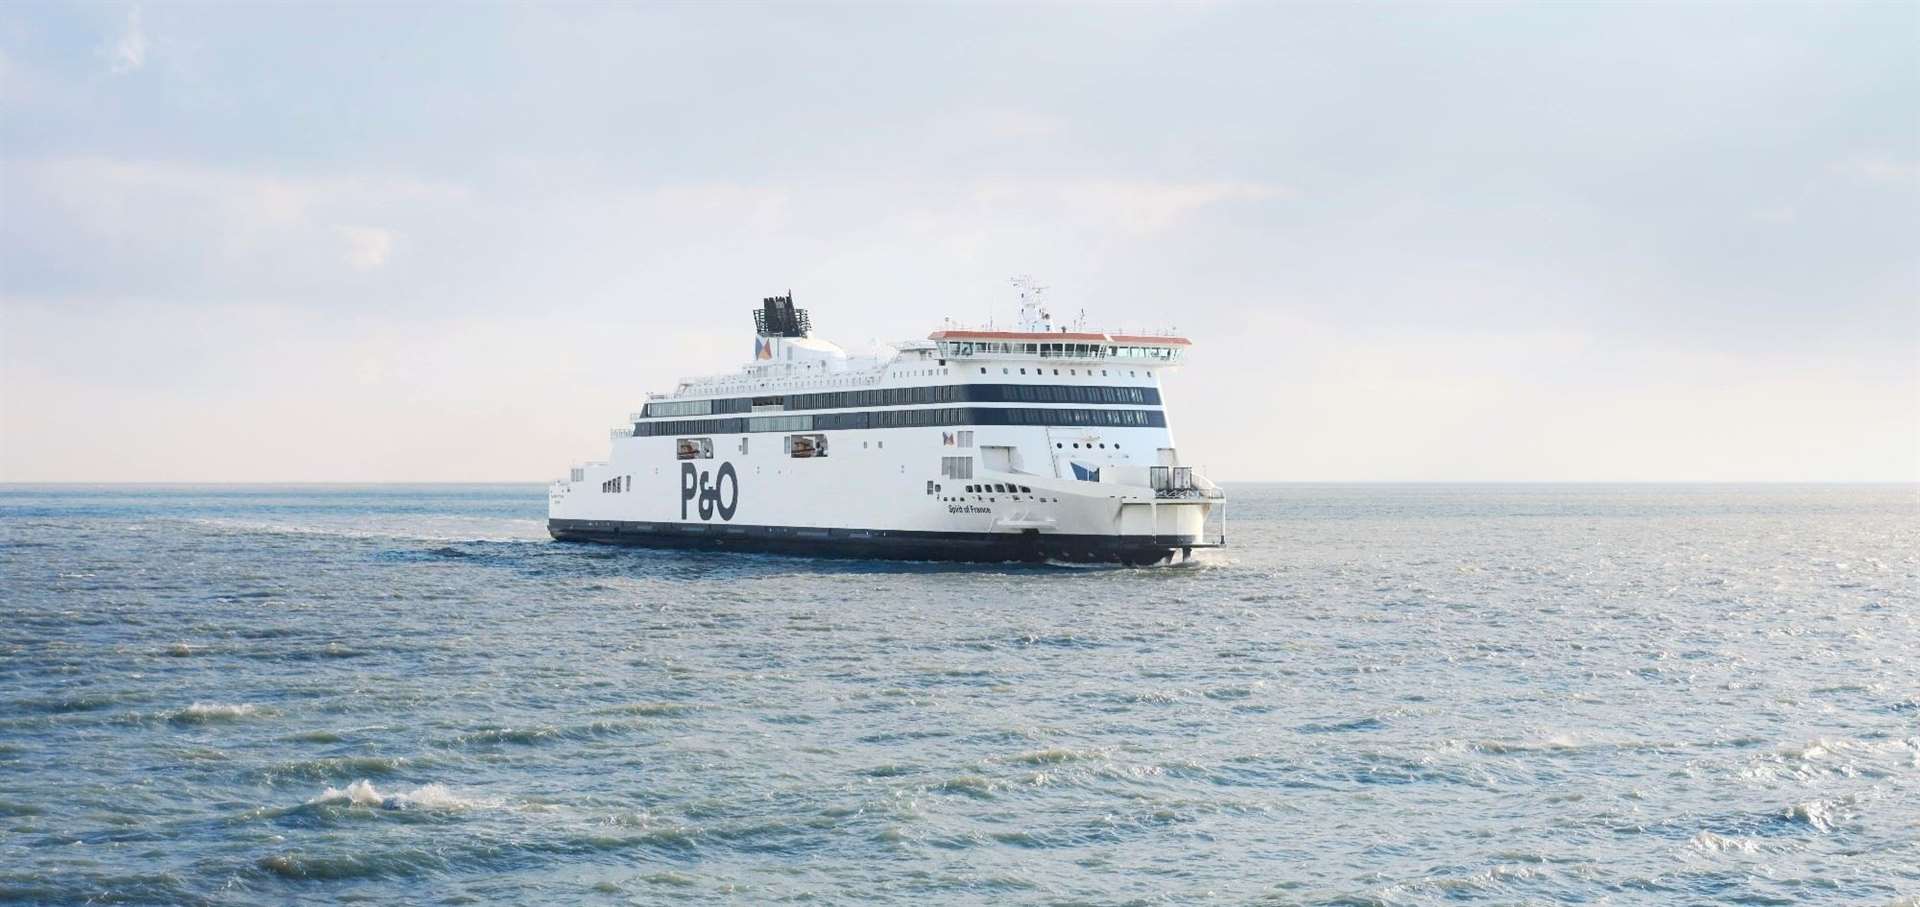 P&O Ferries continues to sail on its Dover to Calais route